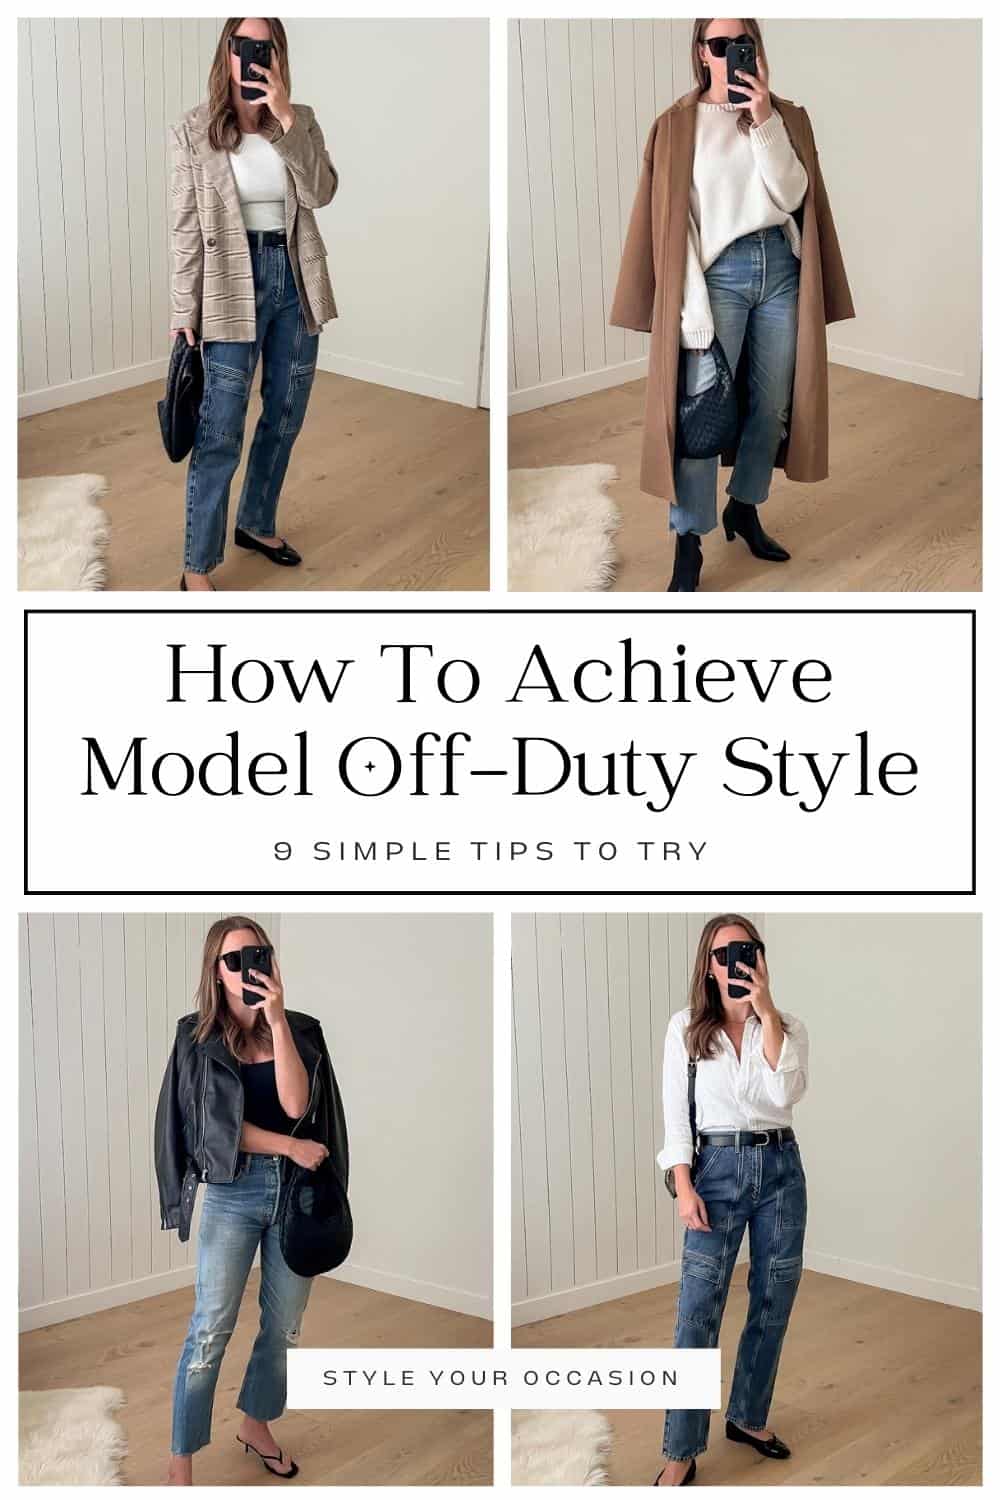 How to get model off-duty style graphic of a woman wearing four different casual outfits with jeans and neutral pieces.